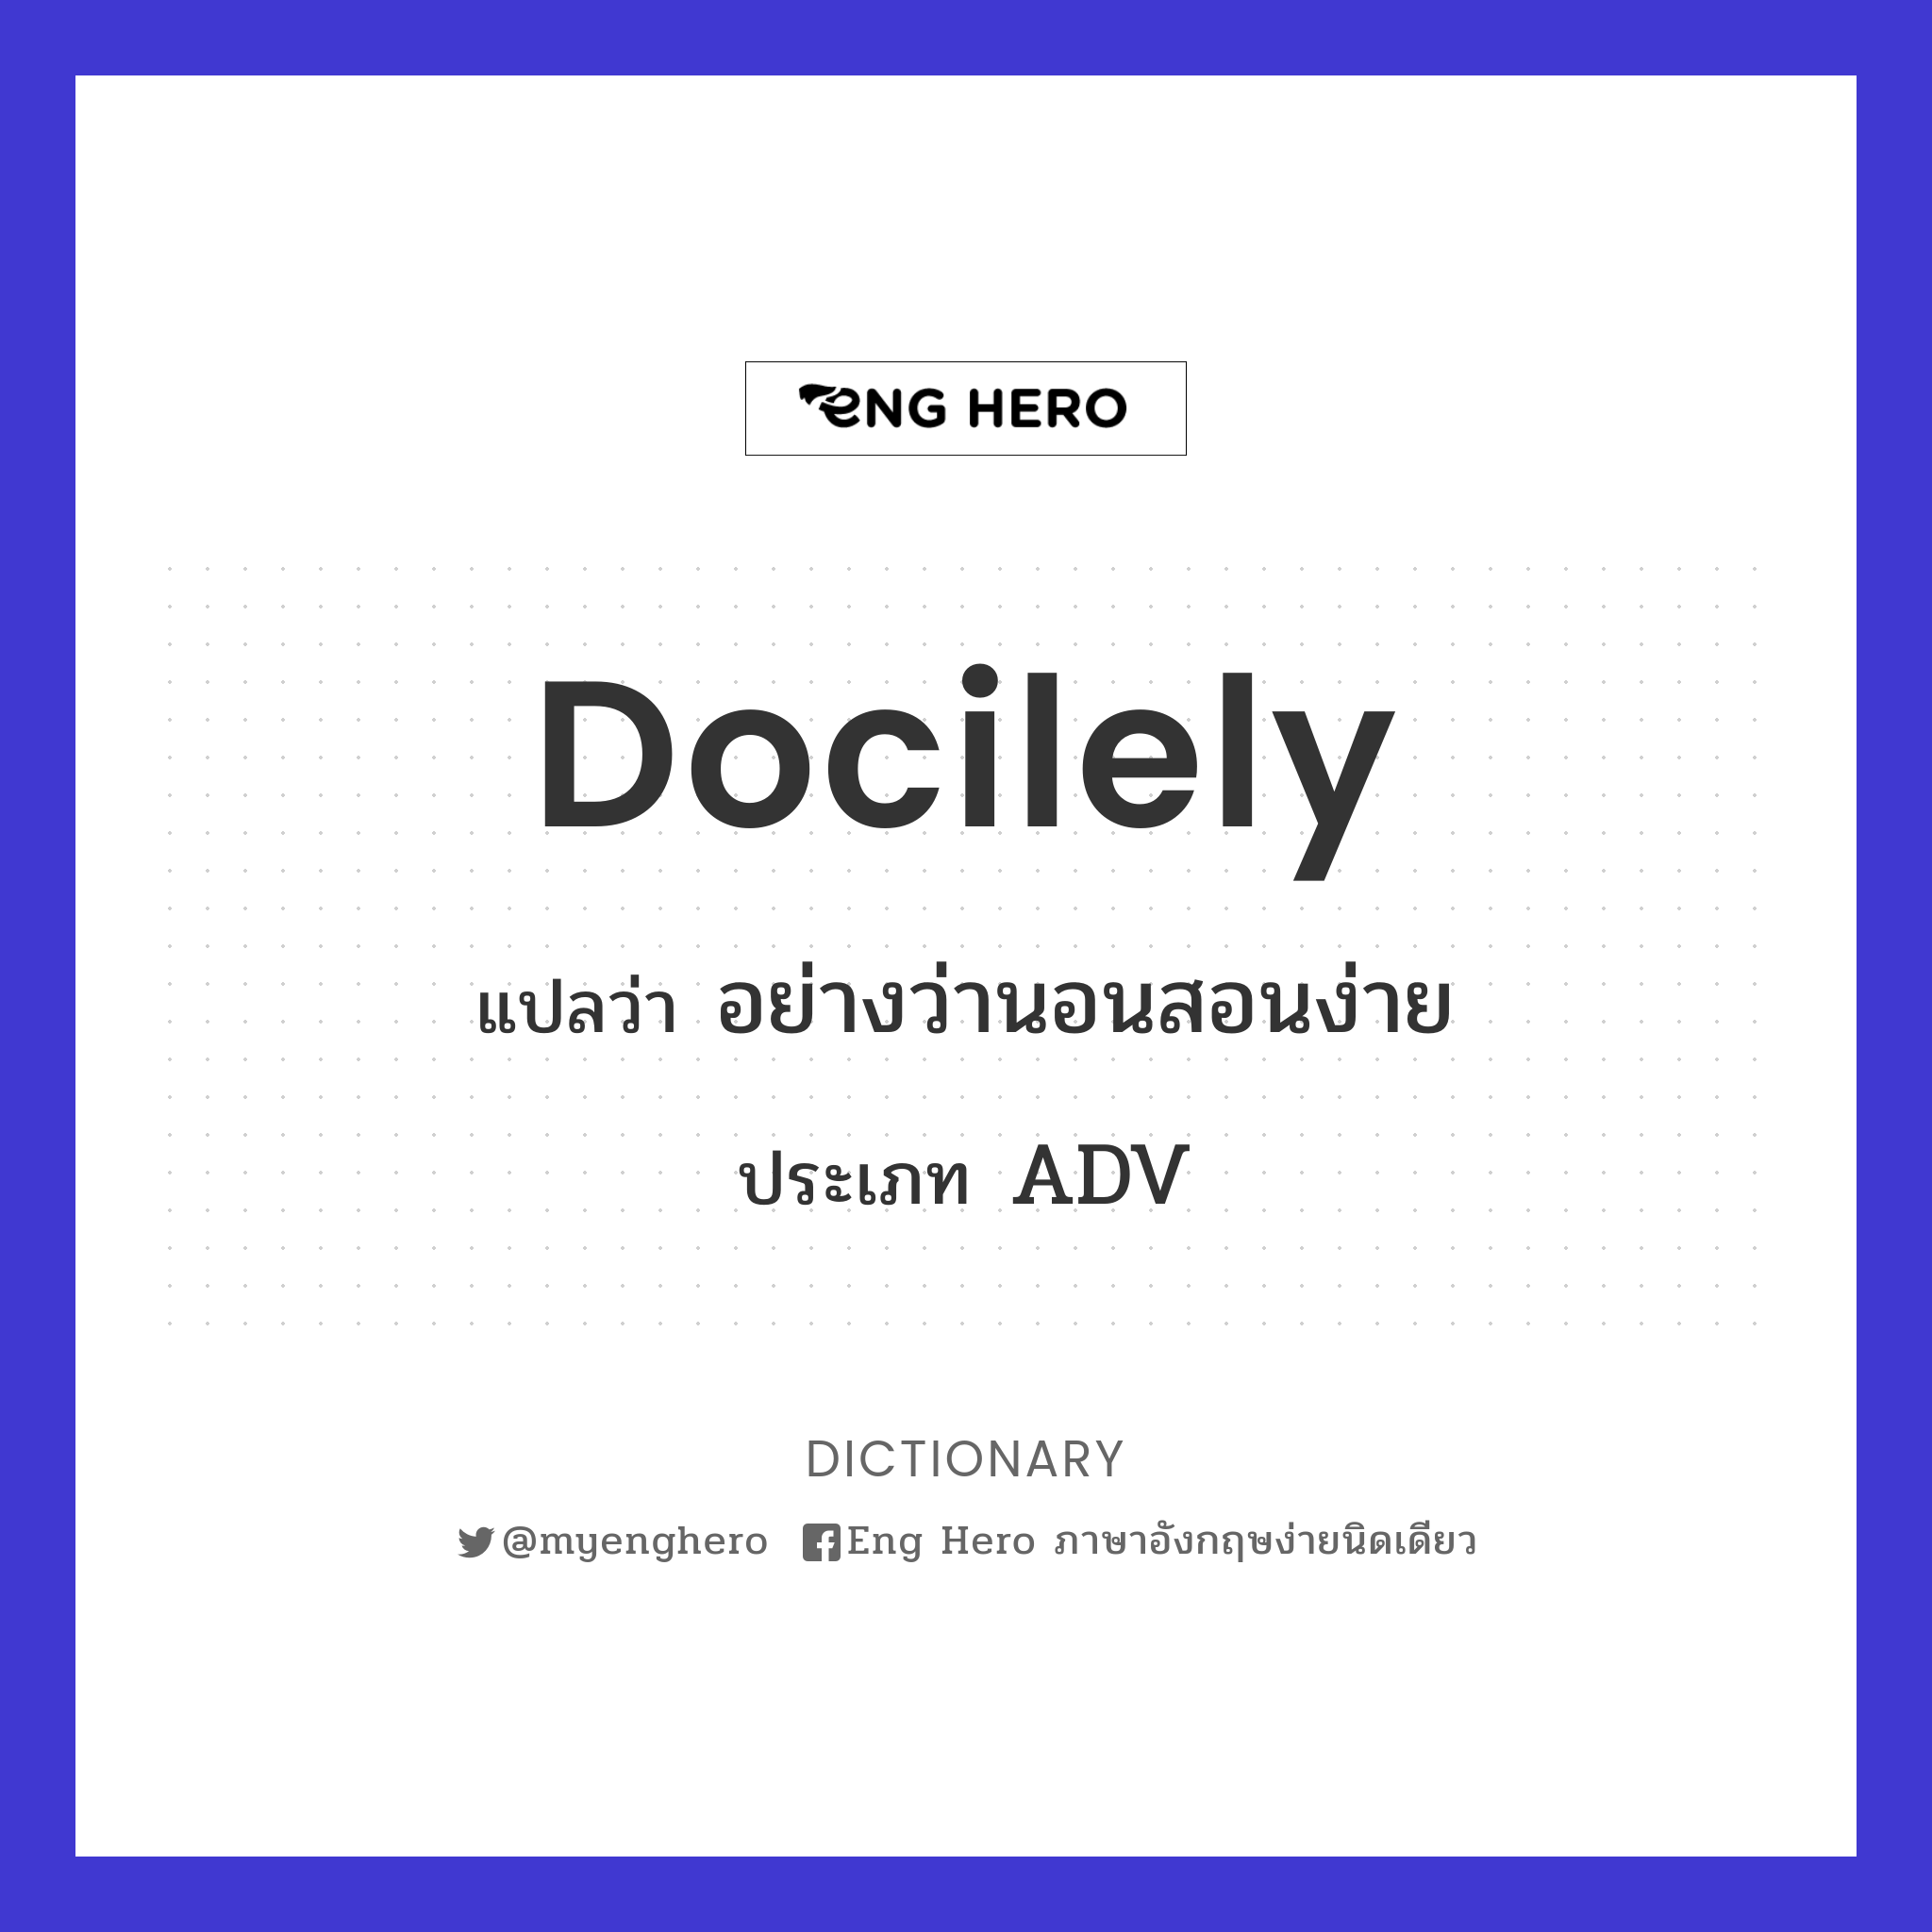 docilely